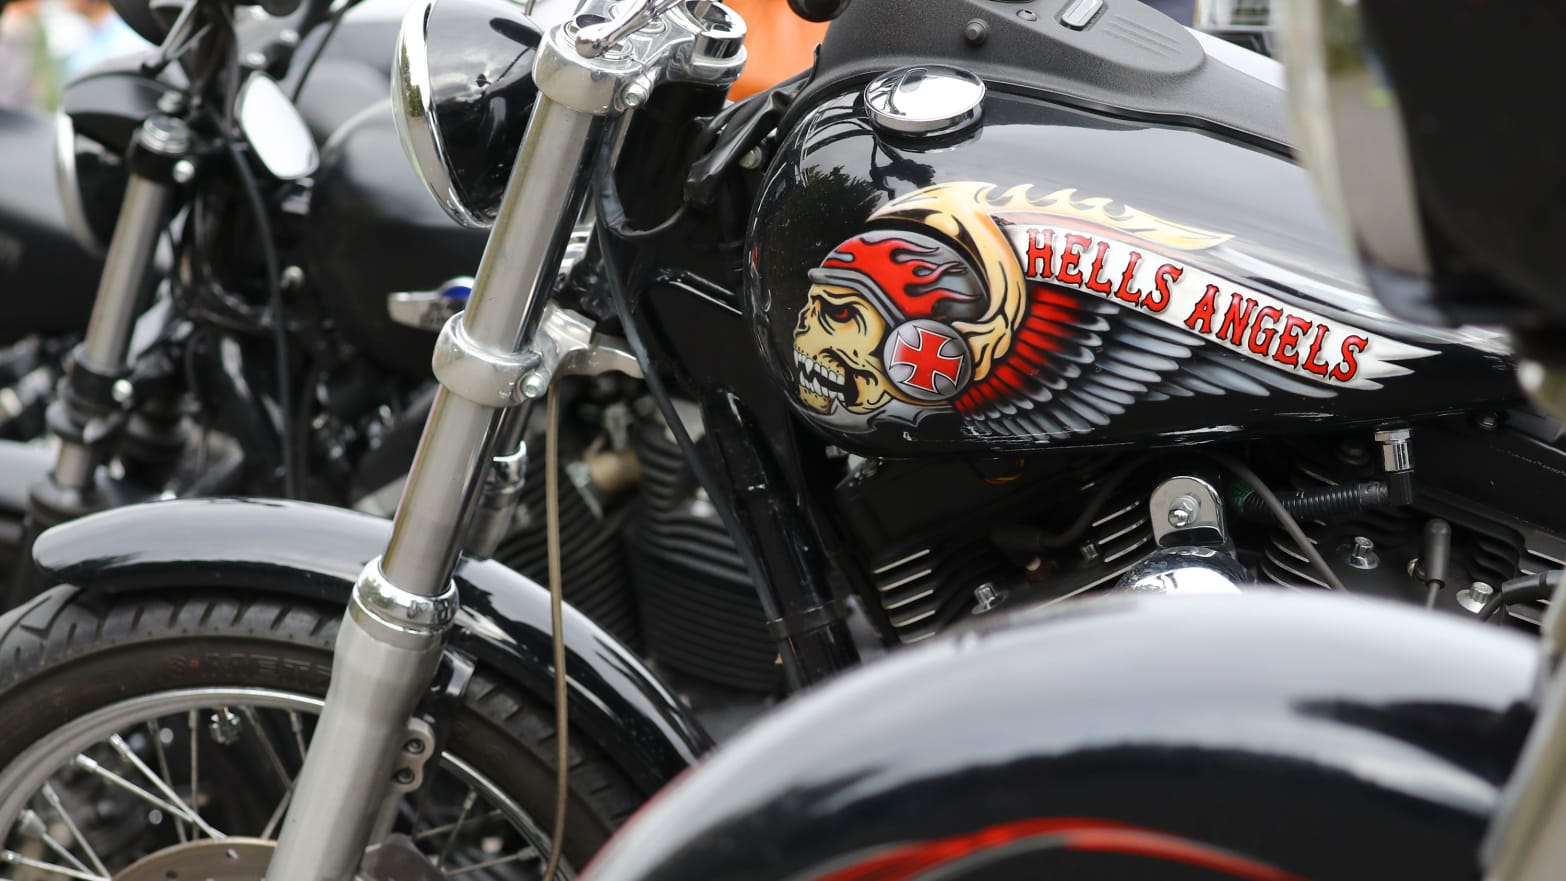 A parked Harley-Davidson motorcycle with a Hells Angels logo and a fierce-looking skull painted on the gas tank.